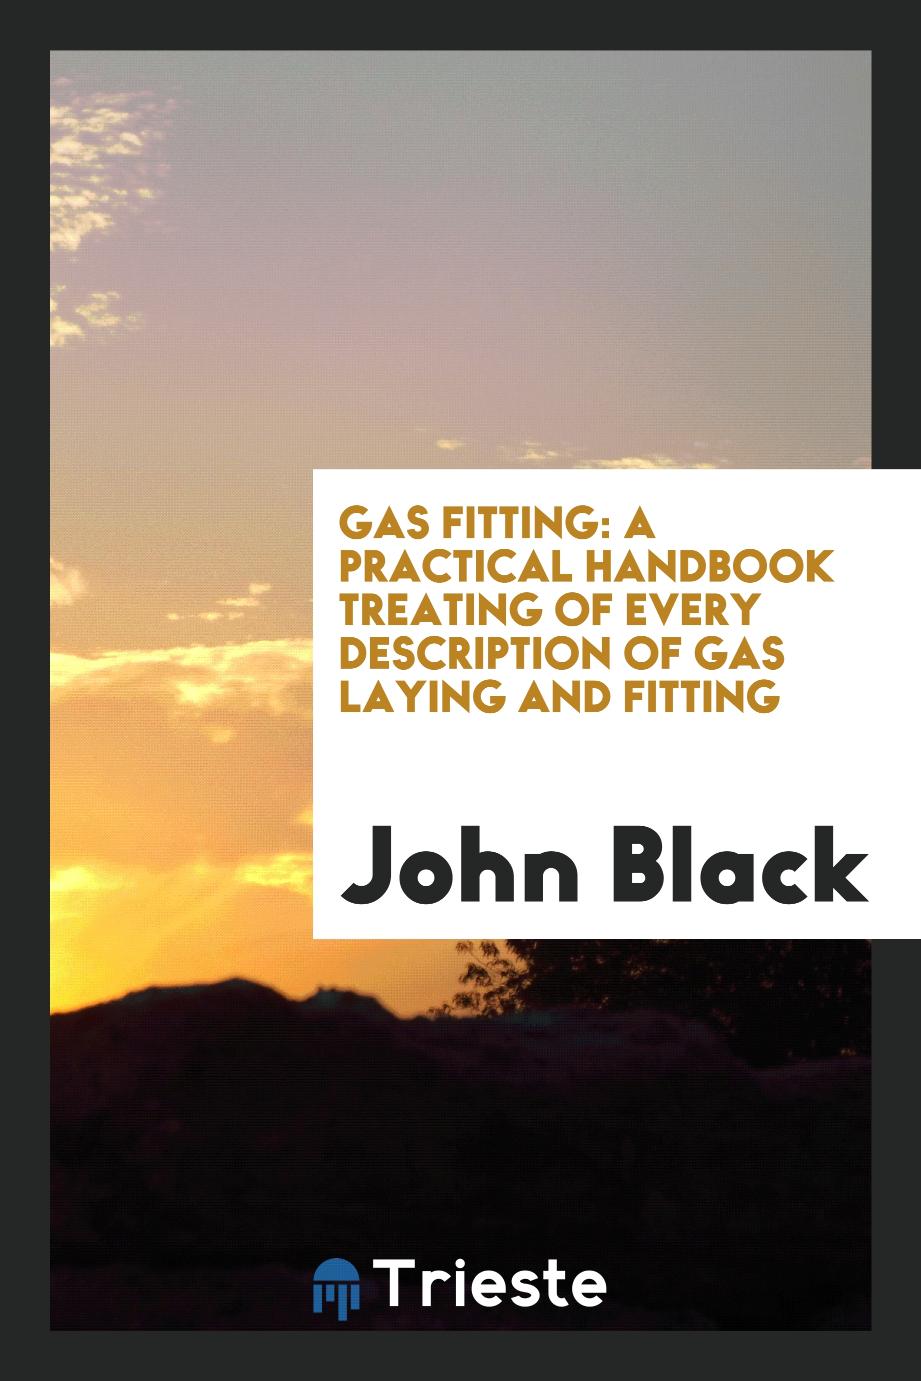 Gas Fitting: A Practical Handbook Treating of Every Description of Gas Laying and Fitting